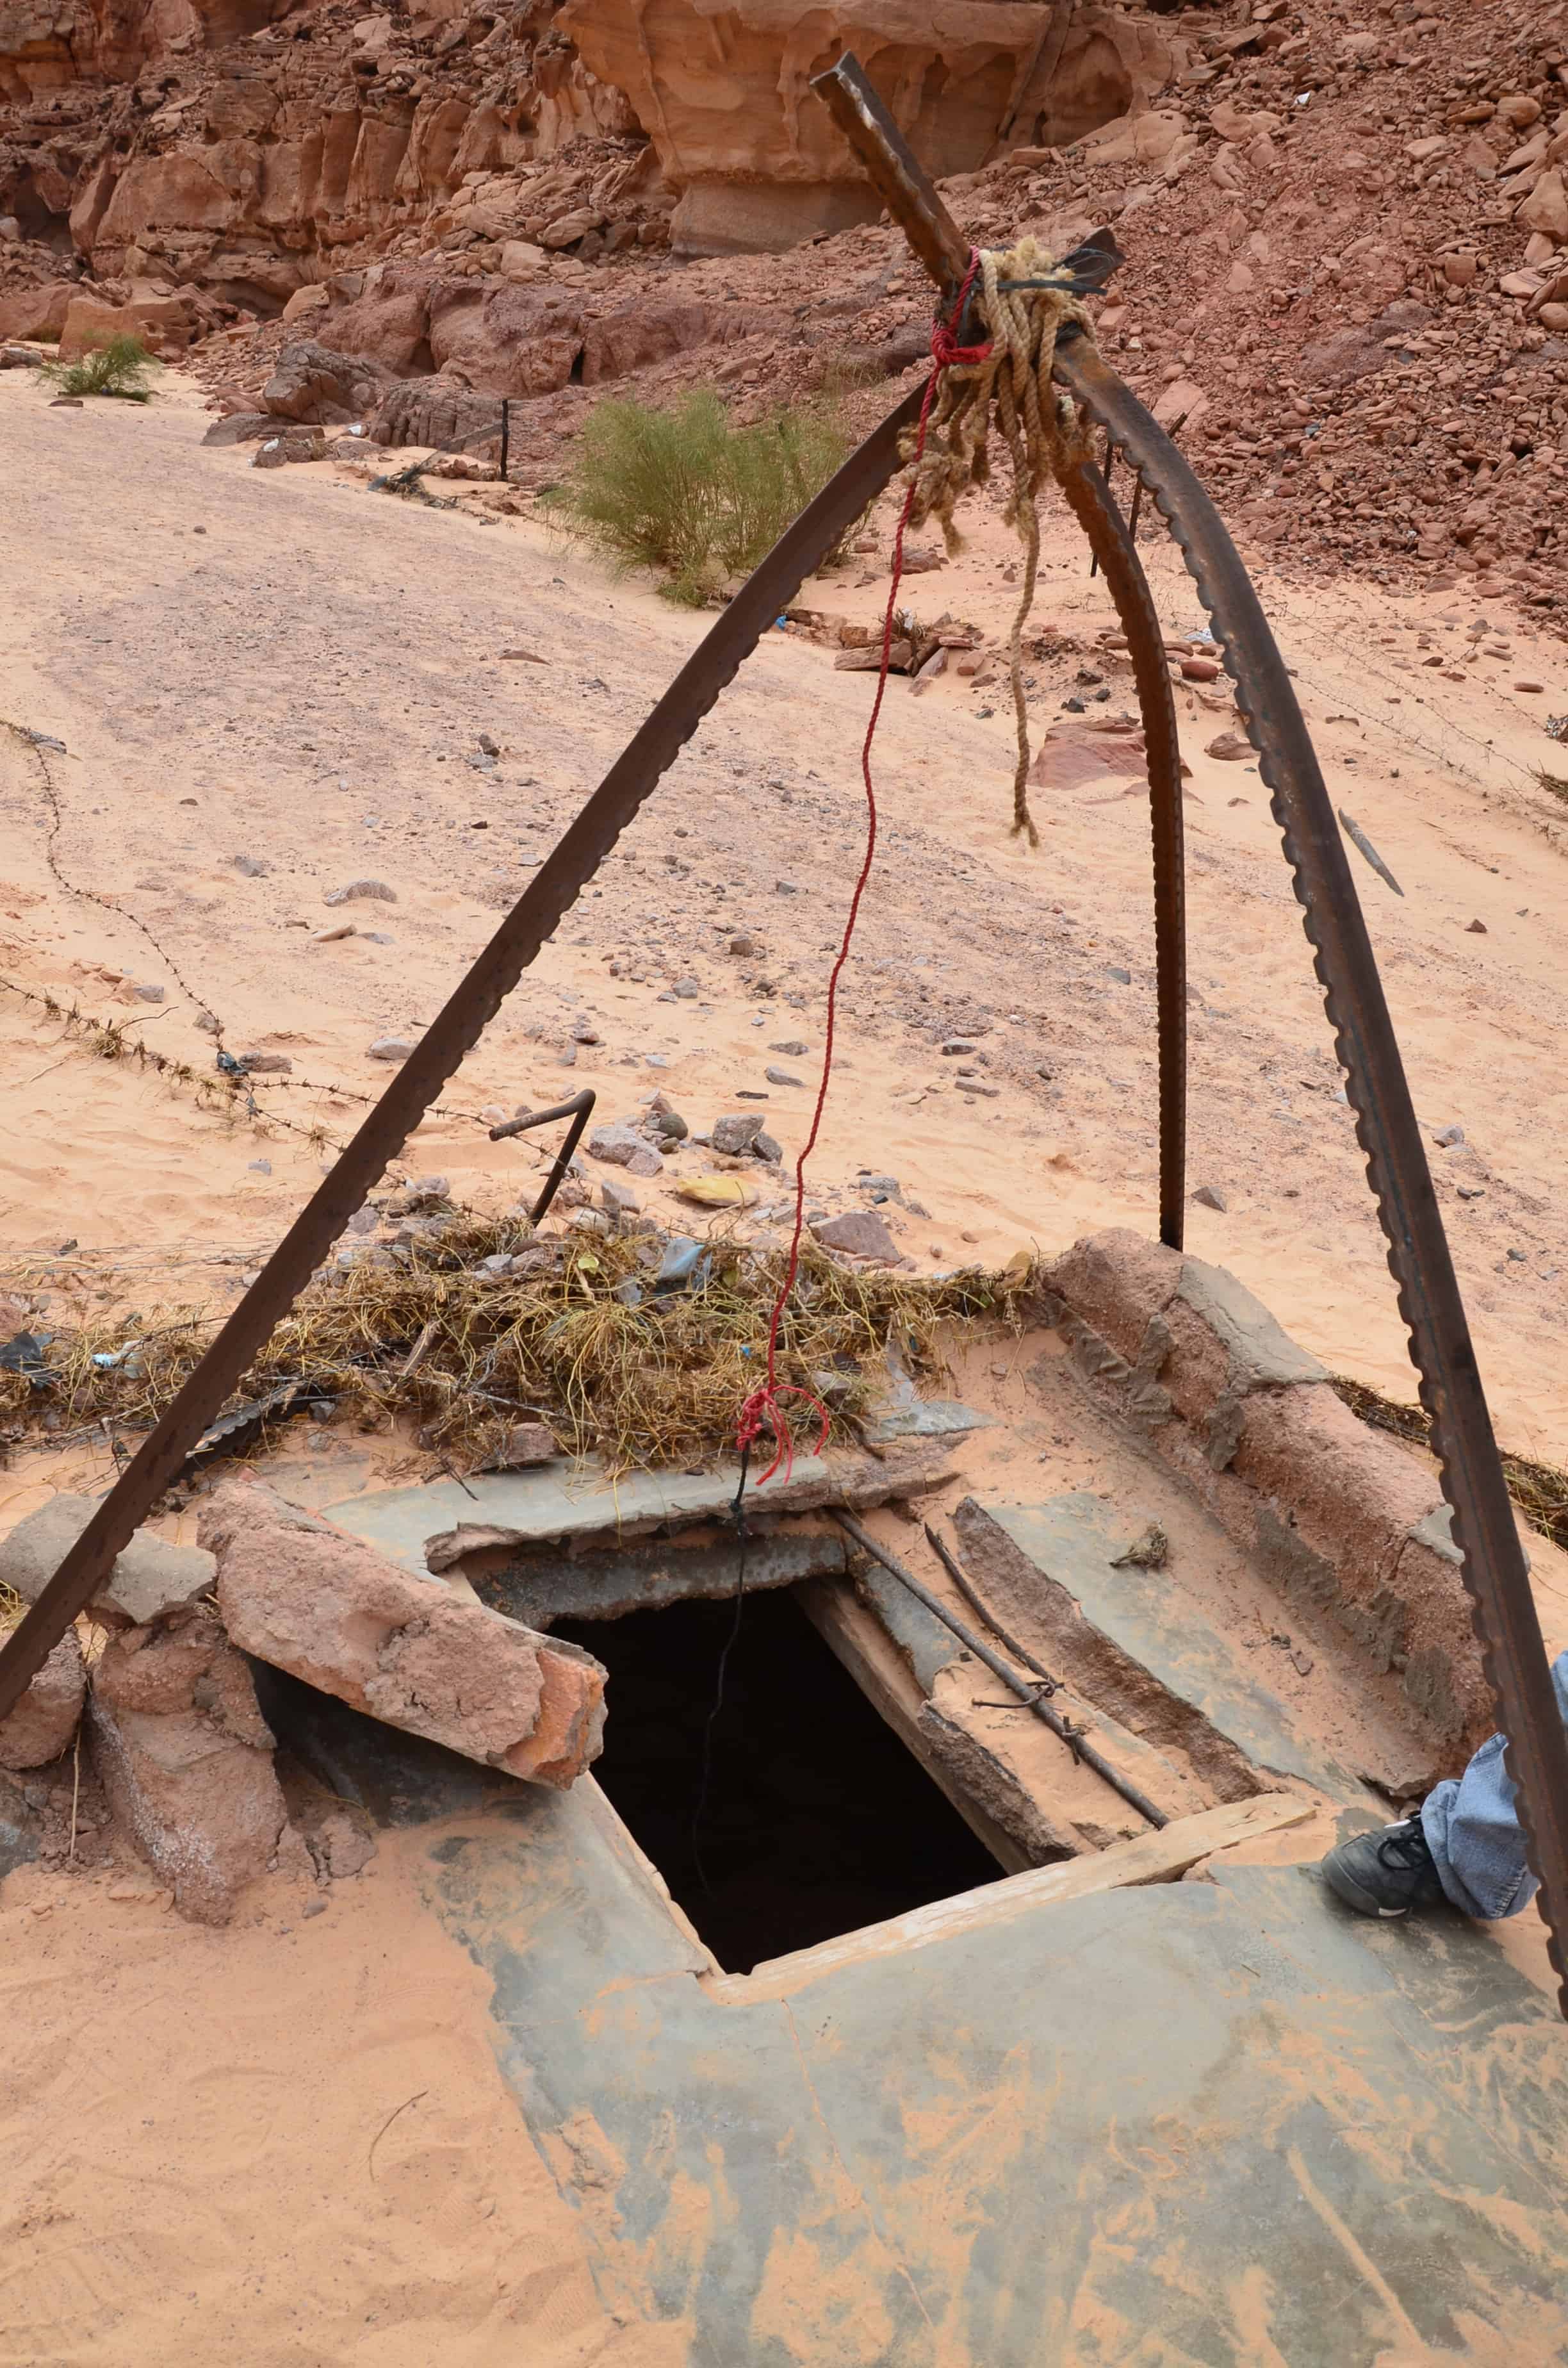 Bedouin well at the fake Colored Canyon in Sinai, Egypt